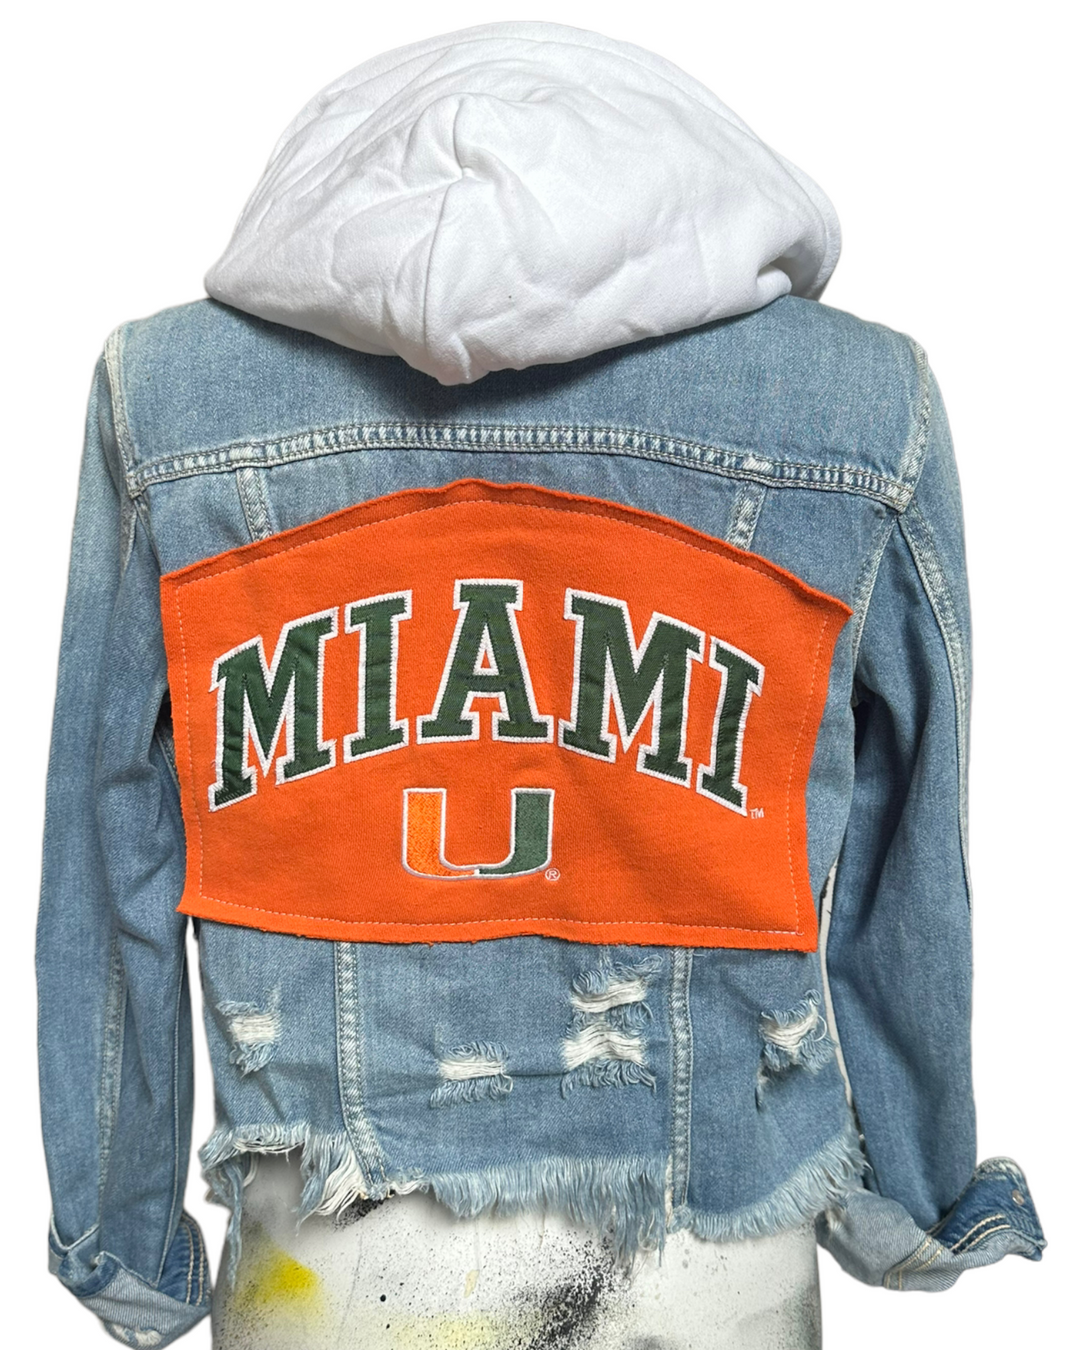 Miami Patched Jean Jacket